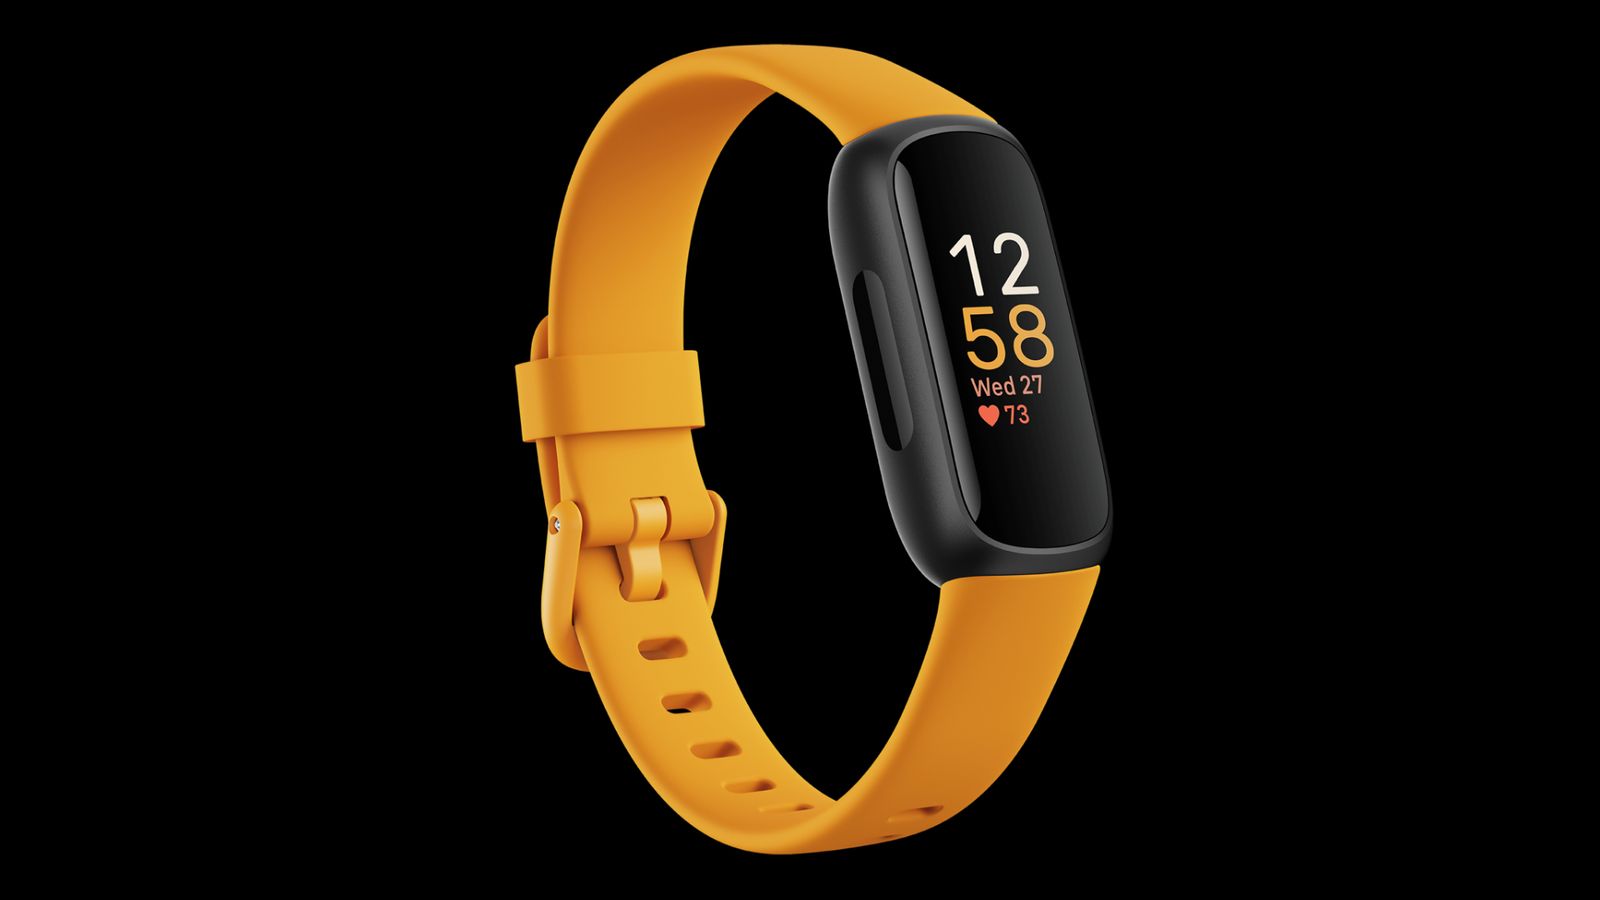 Fitbit Inspire 3 product image of a black fitness tracker with an orange band featuring 12:58 in white and orange on the display.